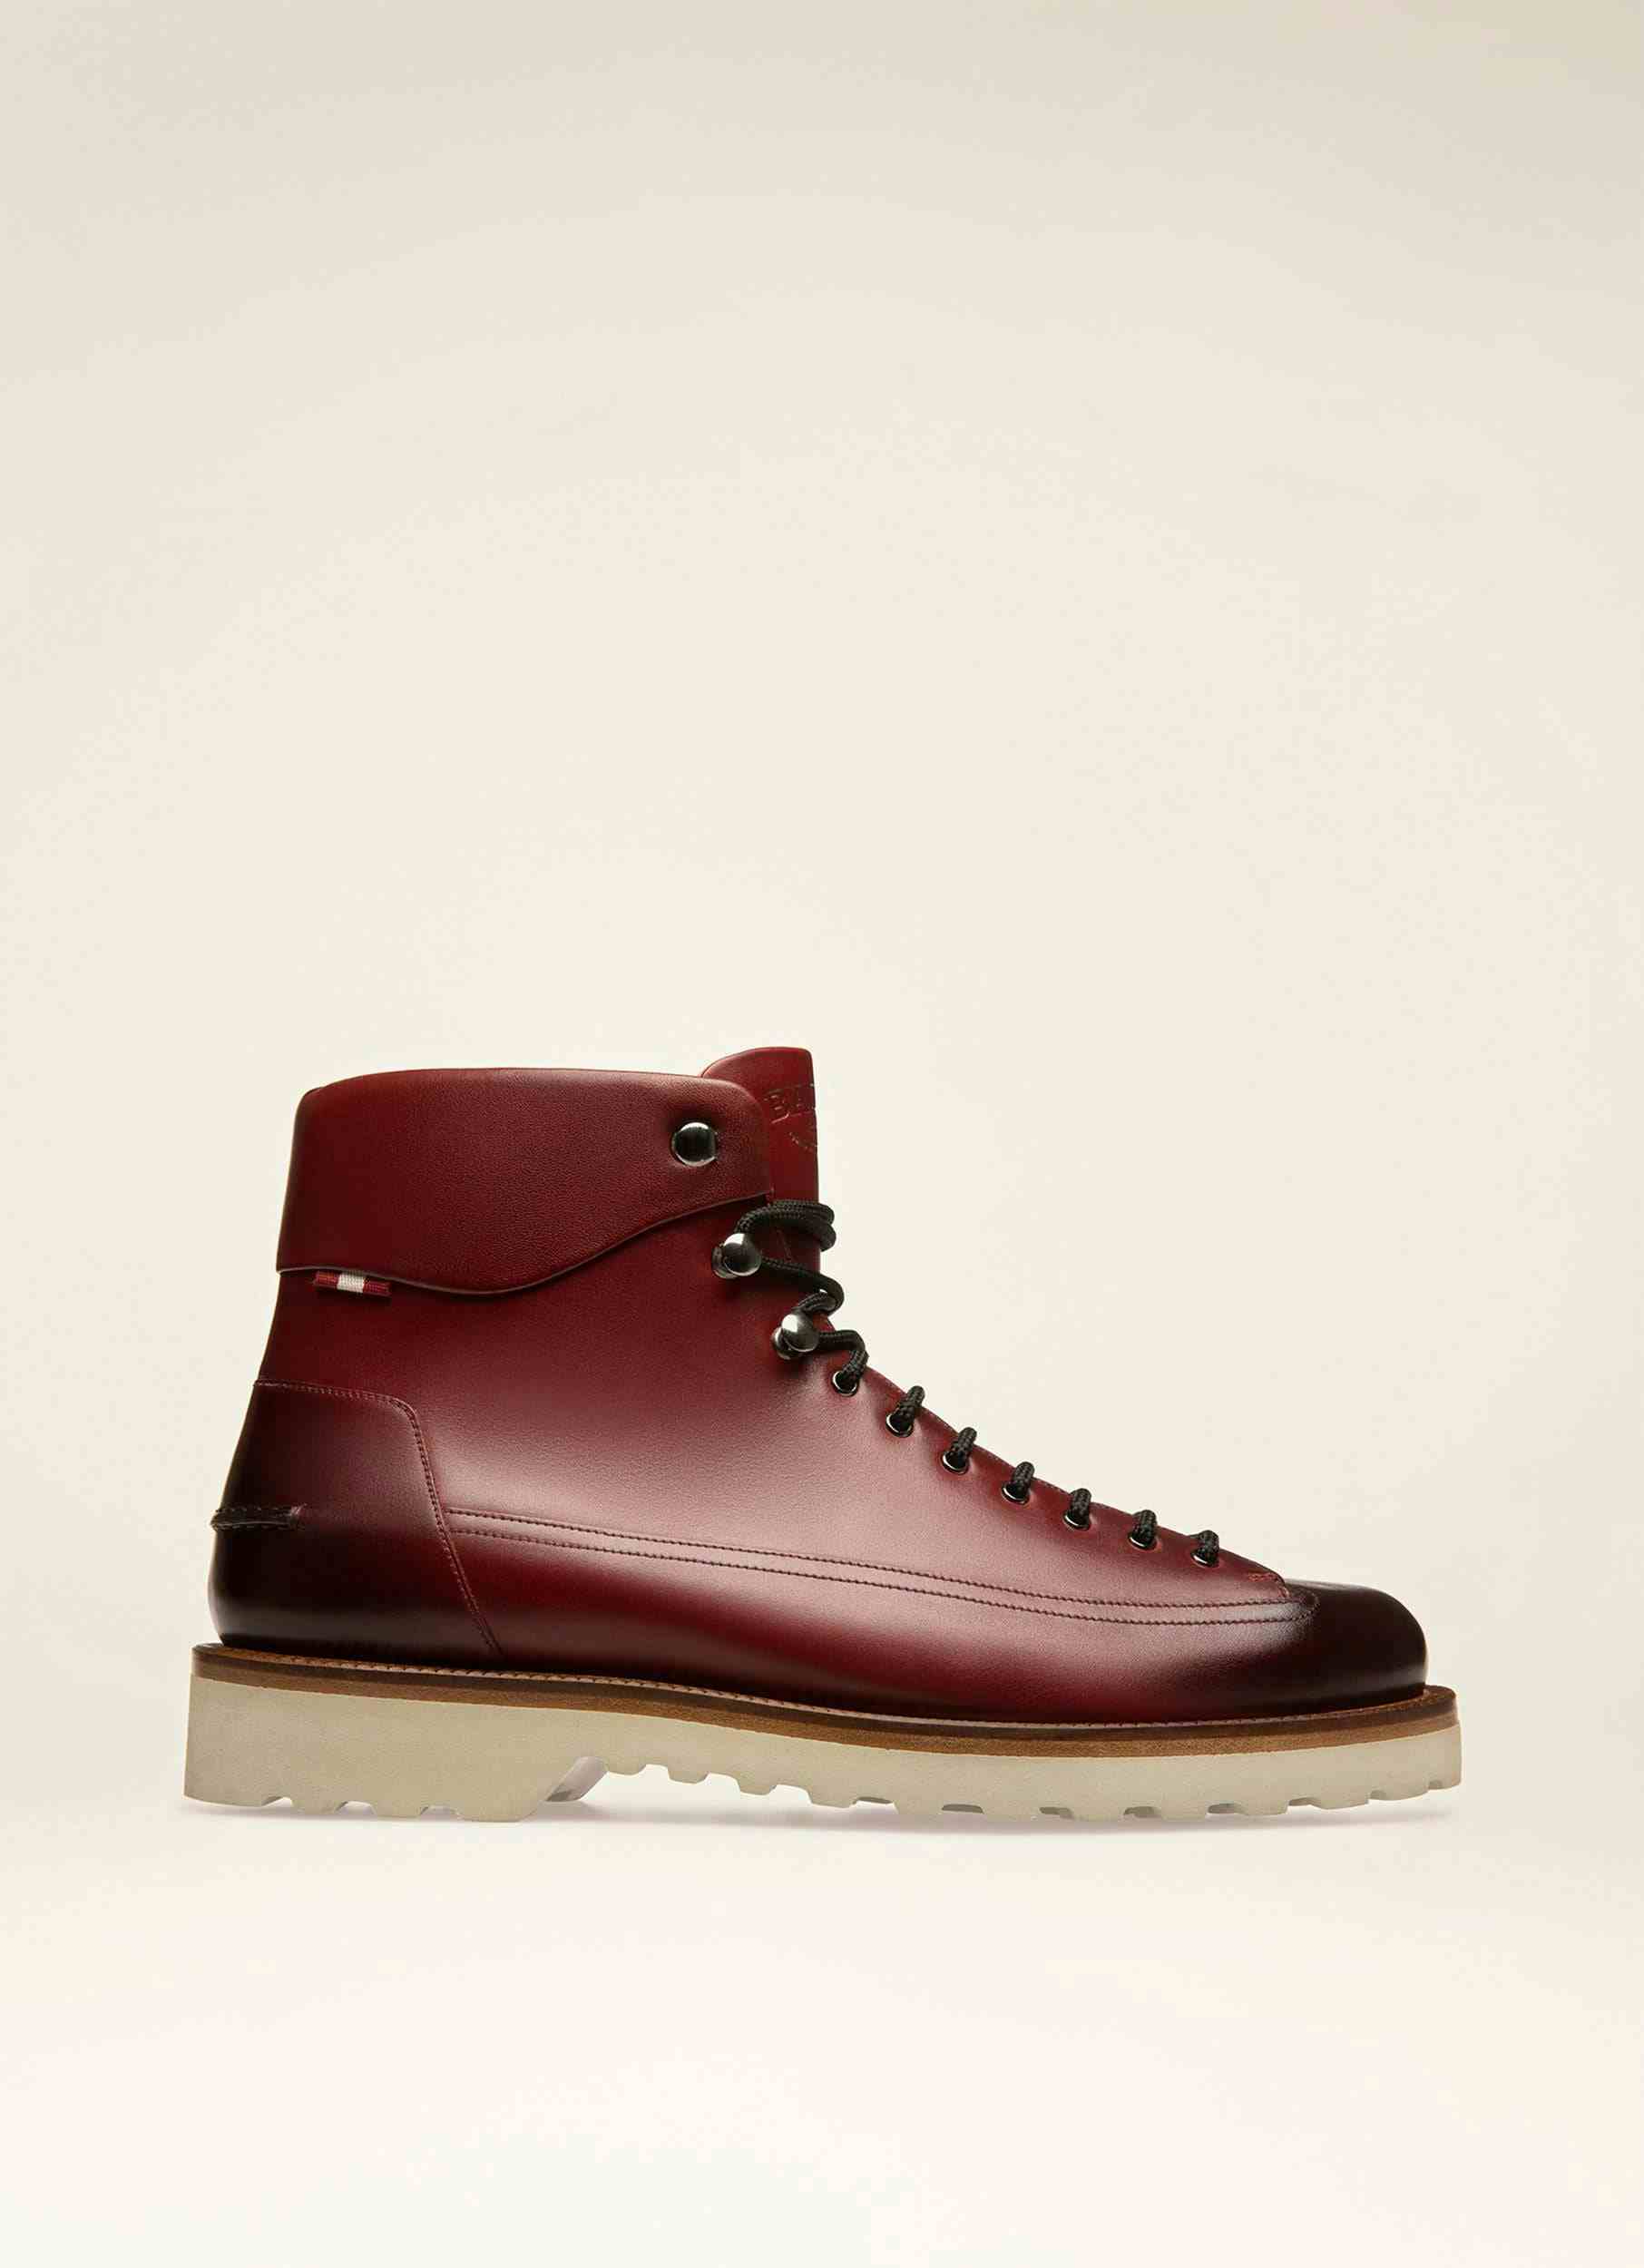 NOTTINGHAM Leather Boots In Heritage Red - Men's - Bally